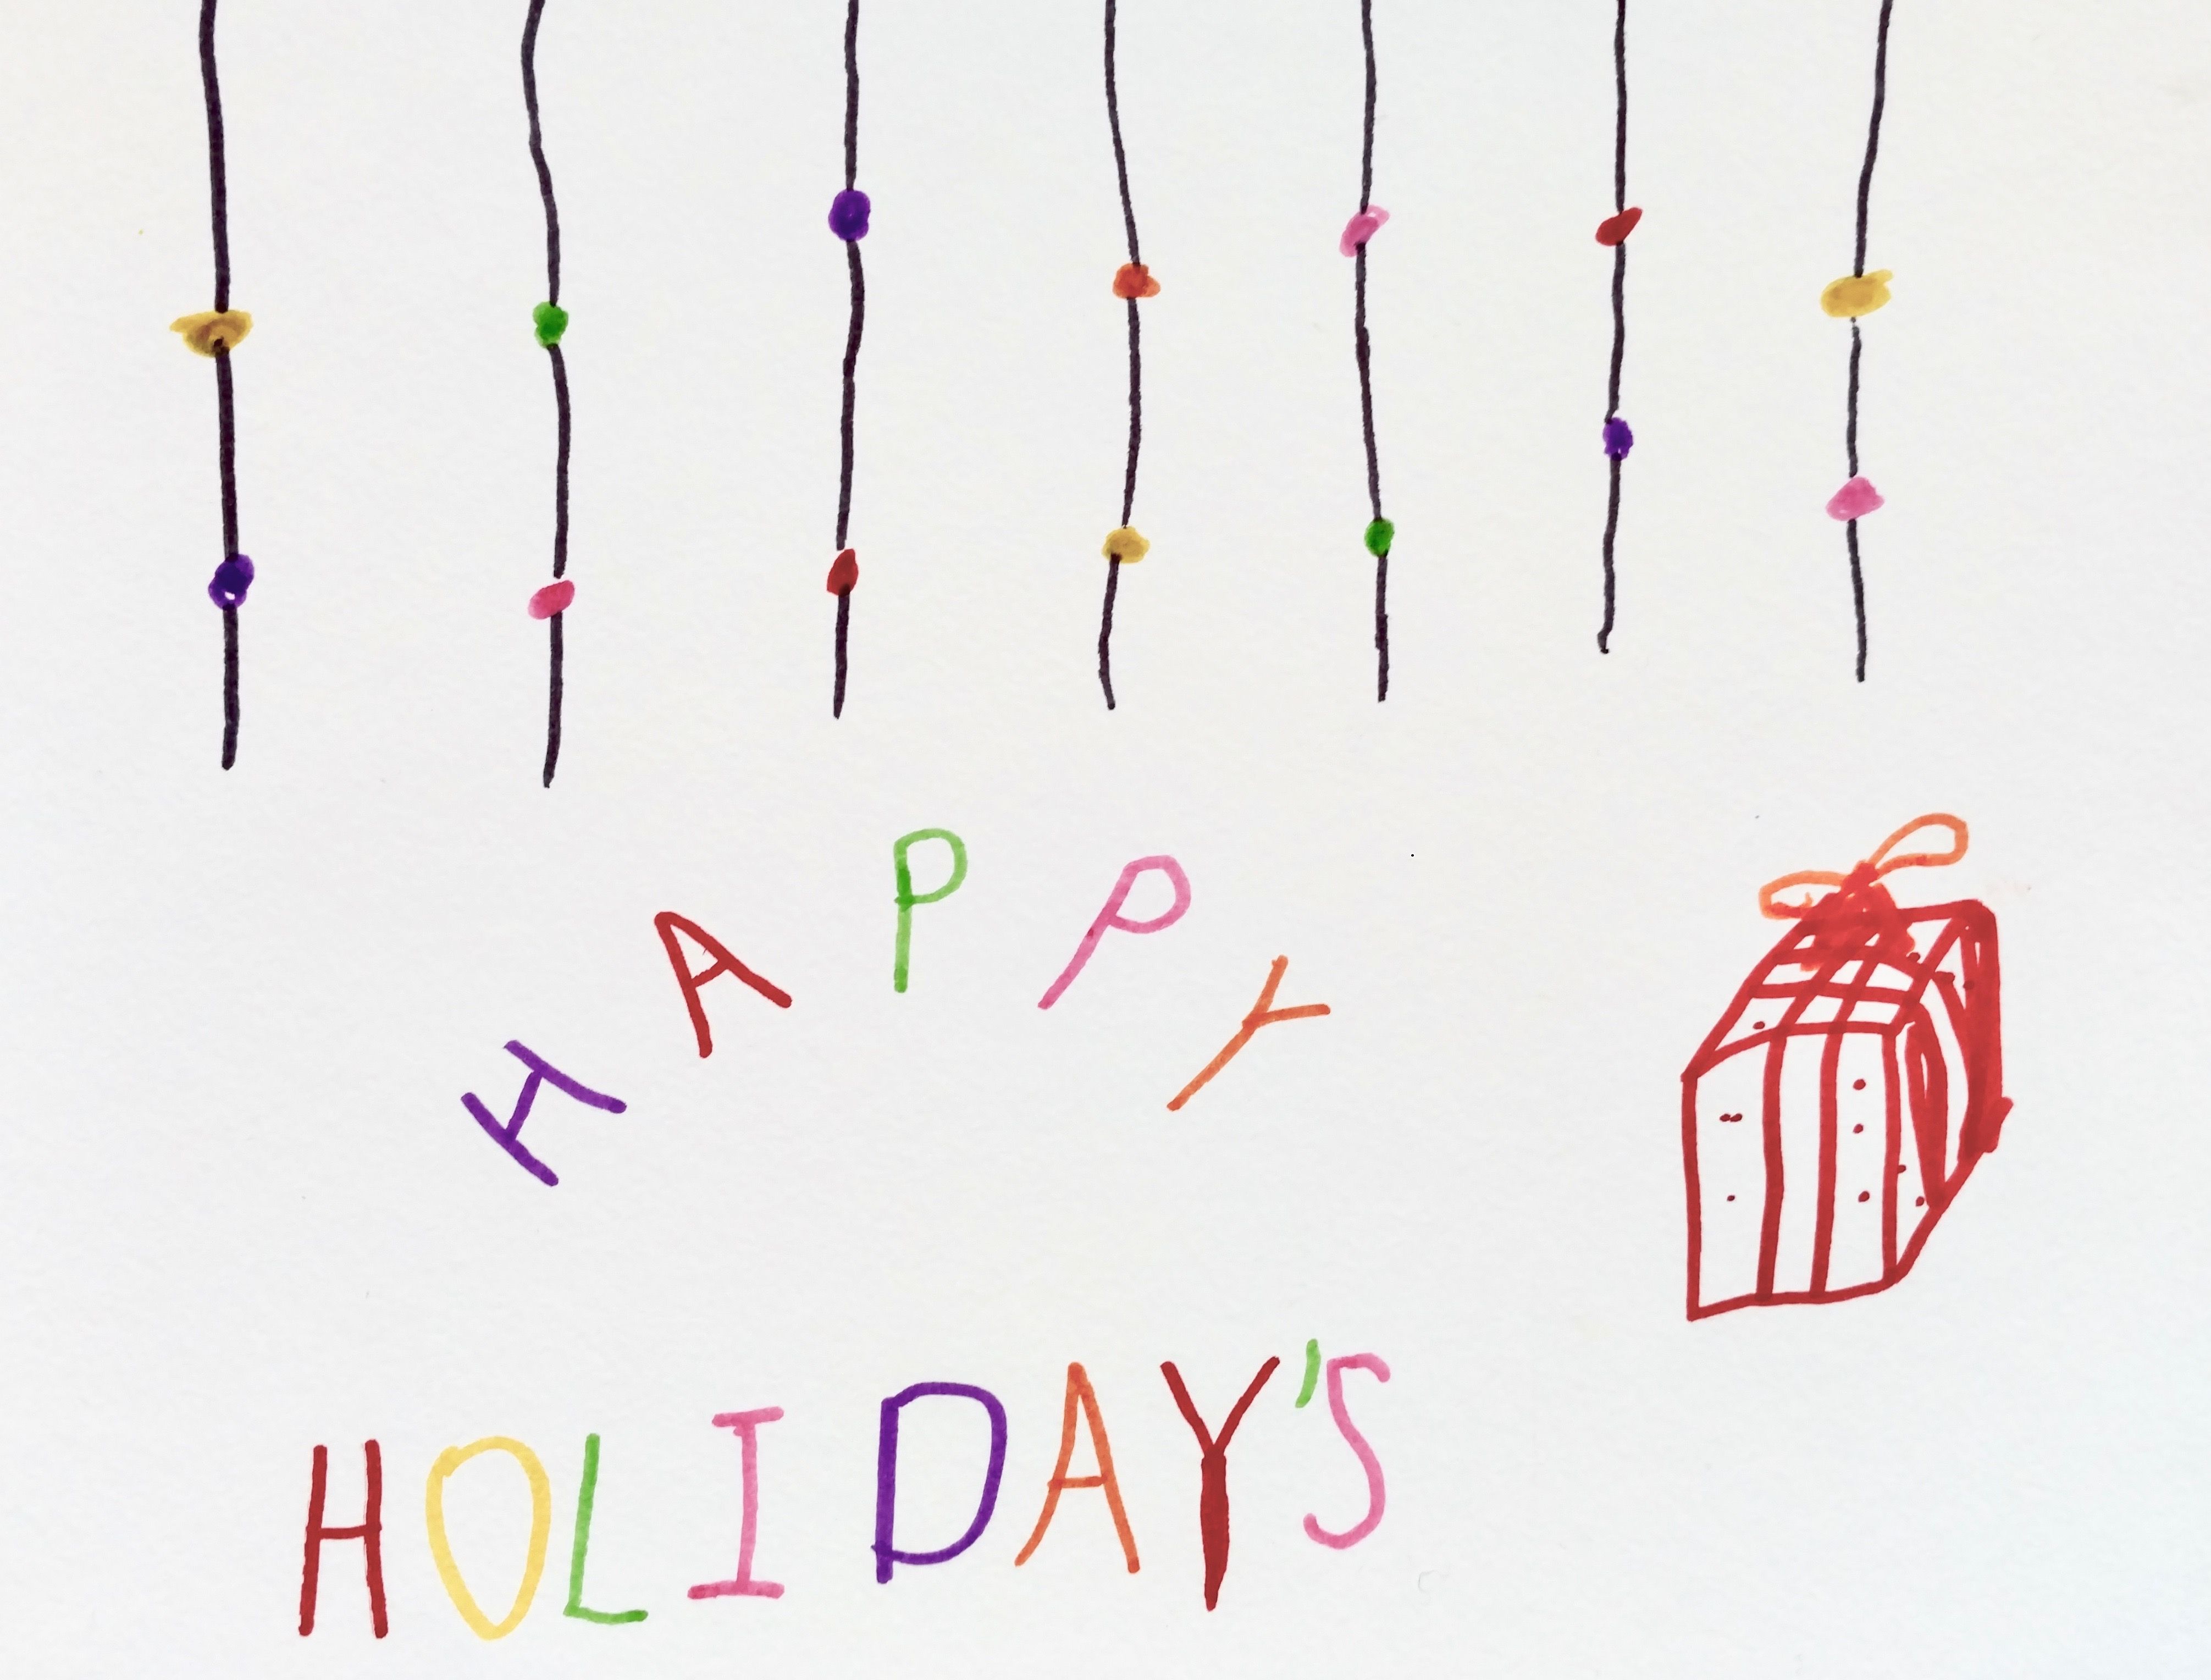 Holiday card art by pediatric patient.